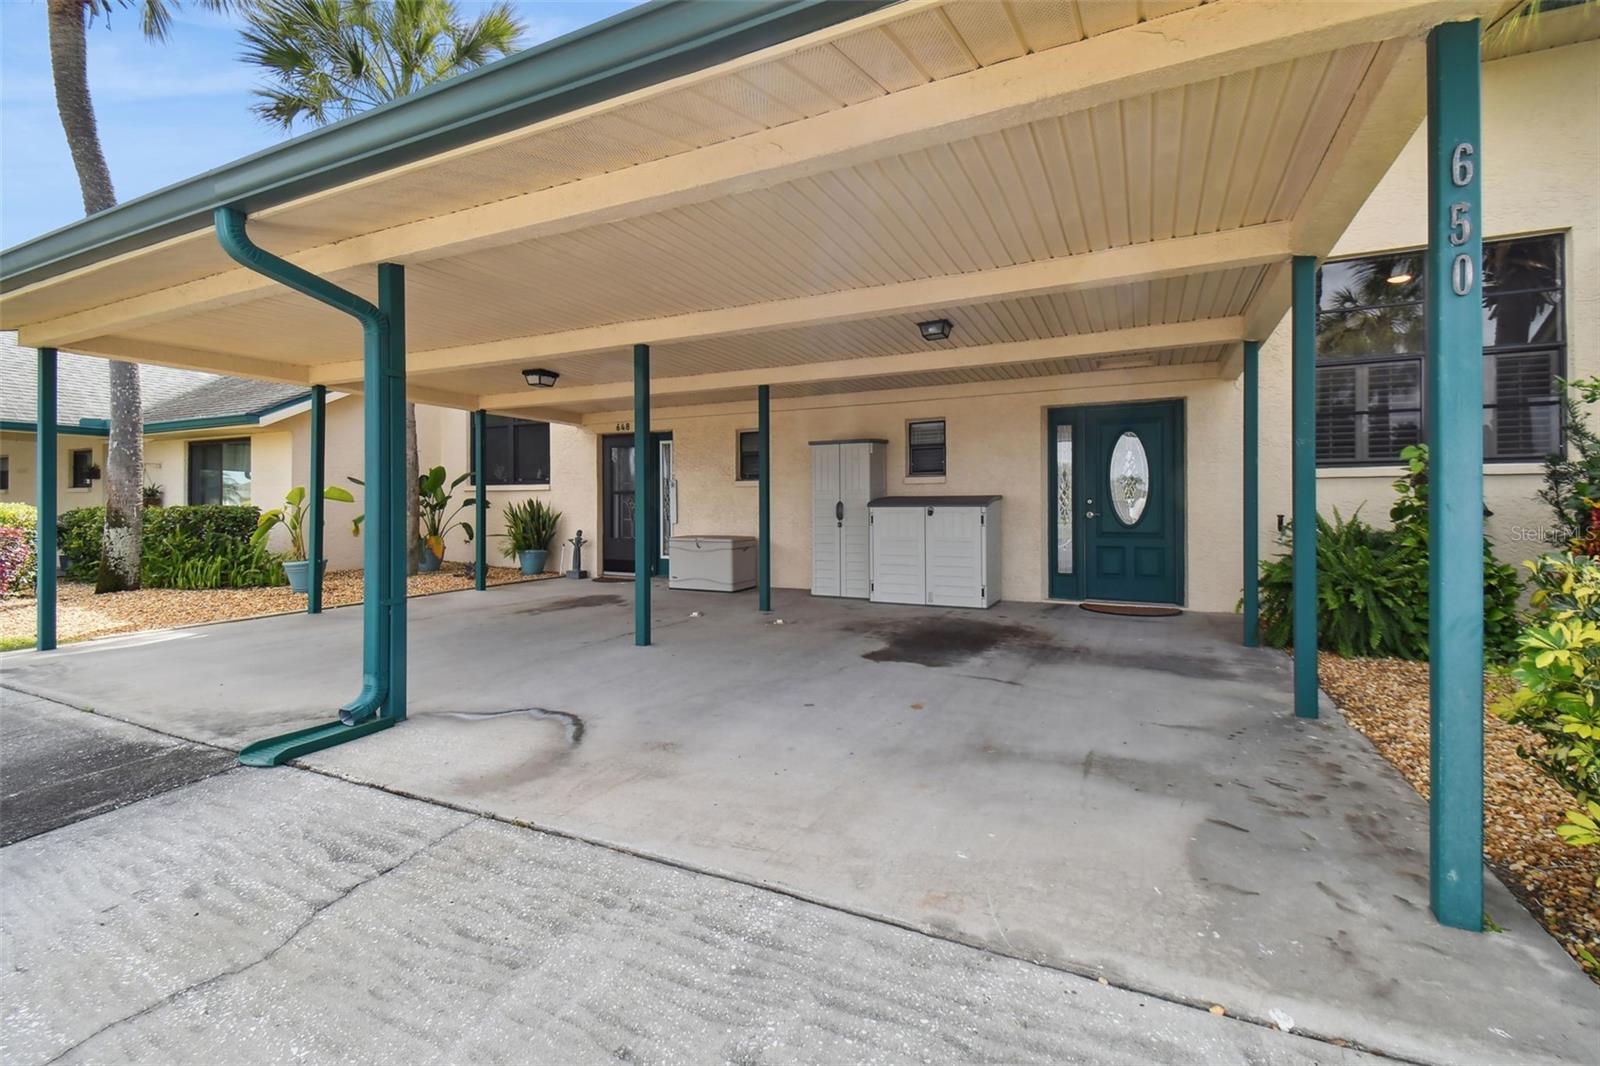 Oversized carport and driveway for you plus plenty of guest parking, too!